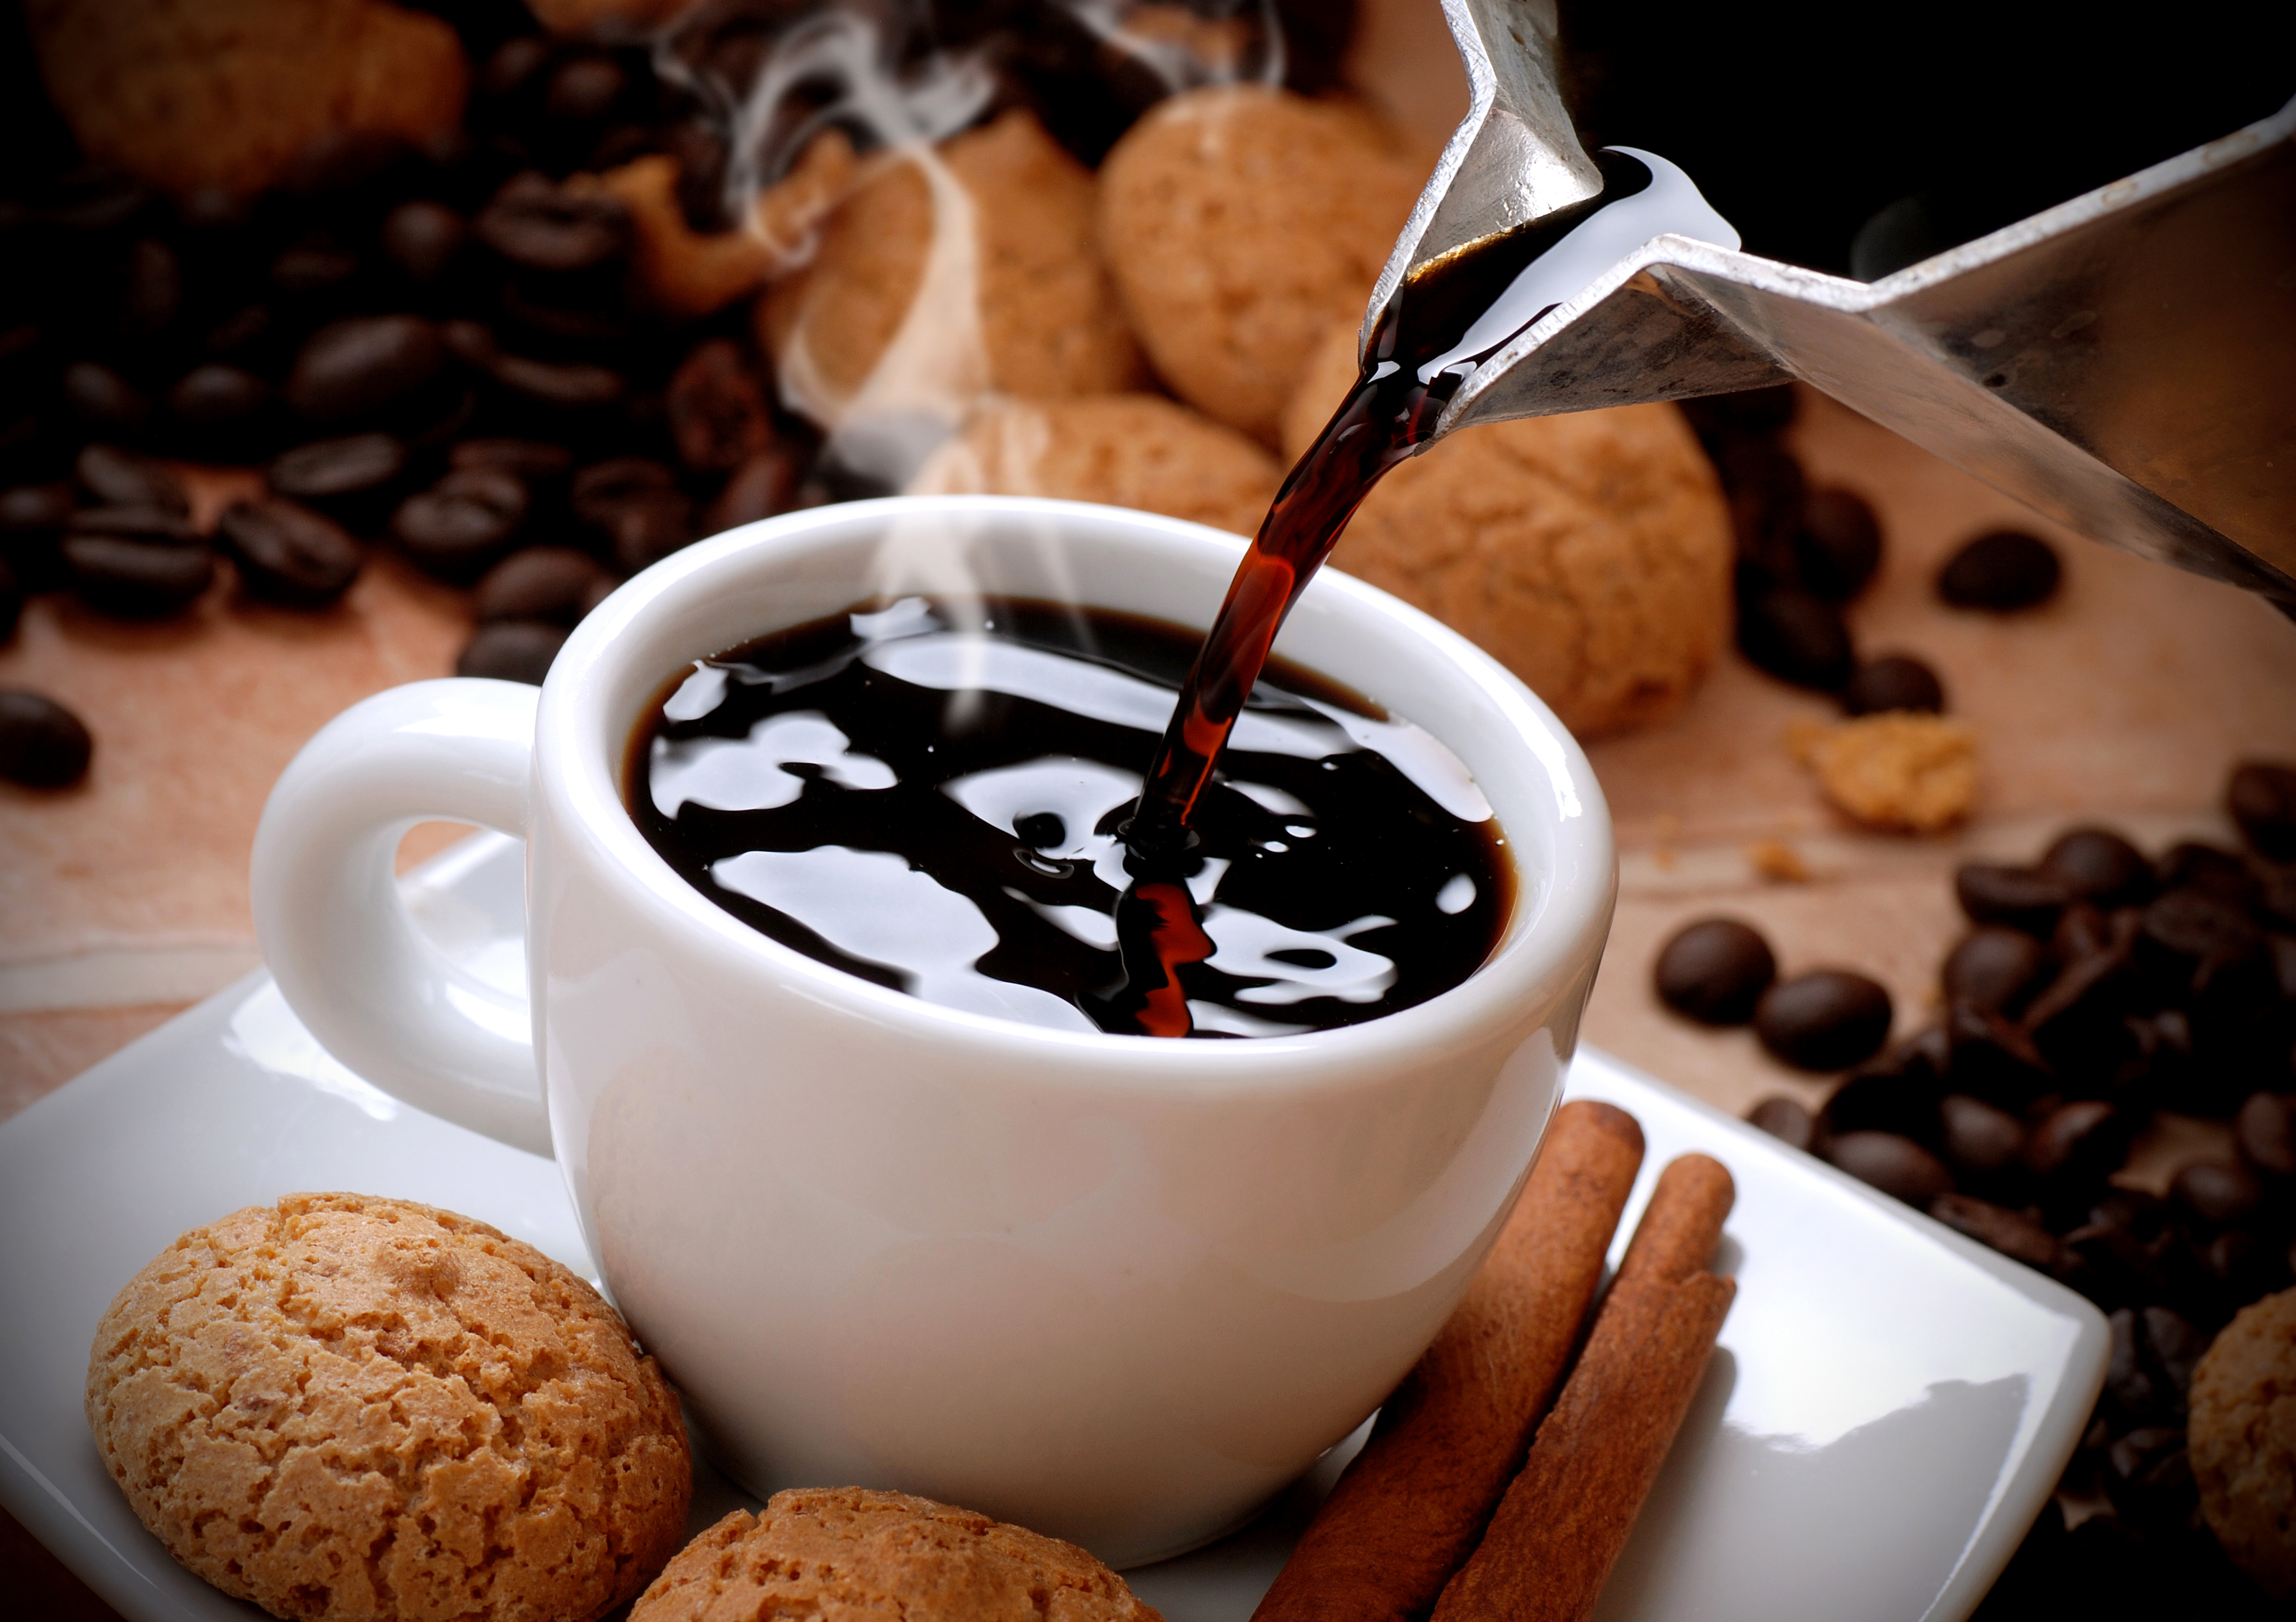 Biscuit Cinnamon Coffee Coffee Beans Cup 3592x2538